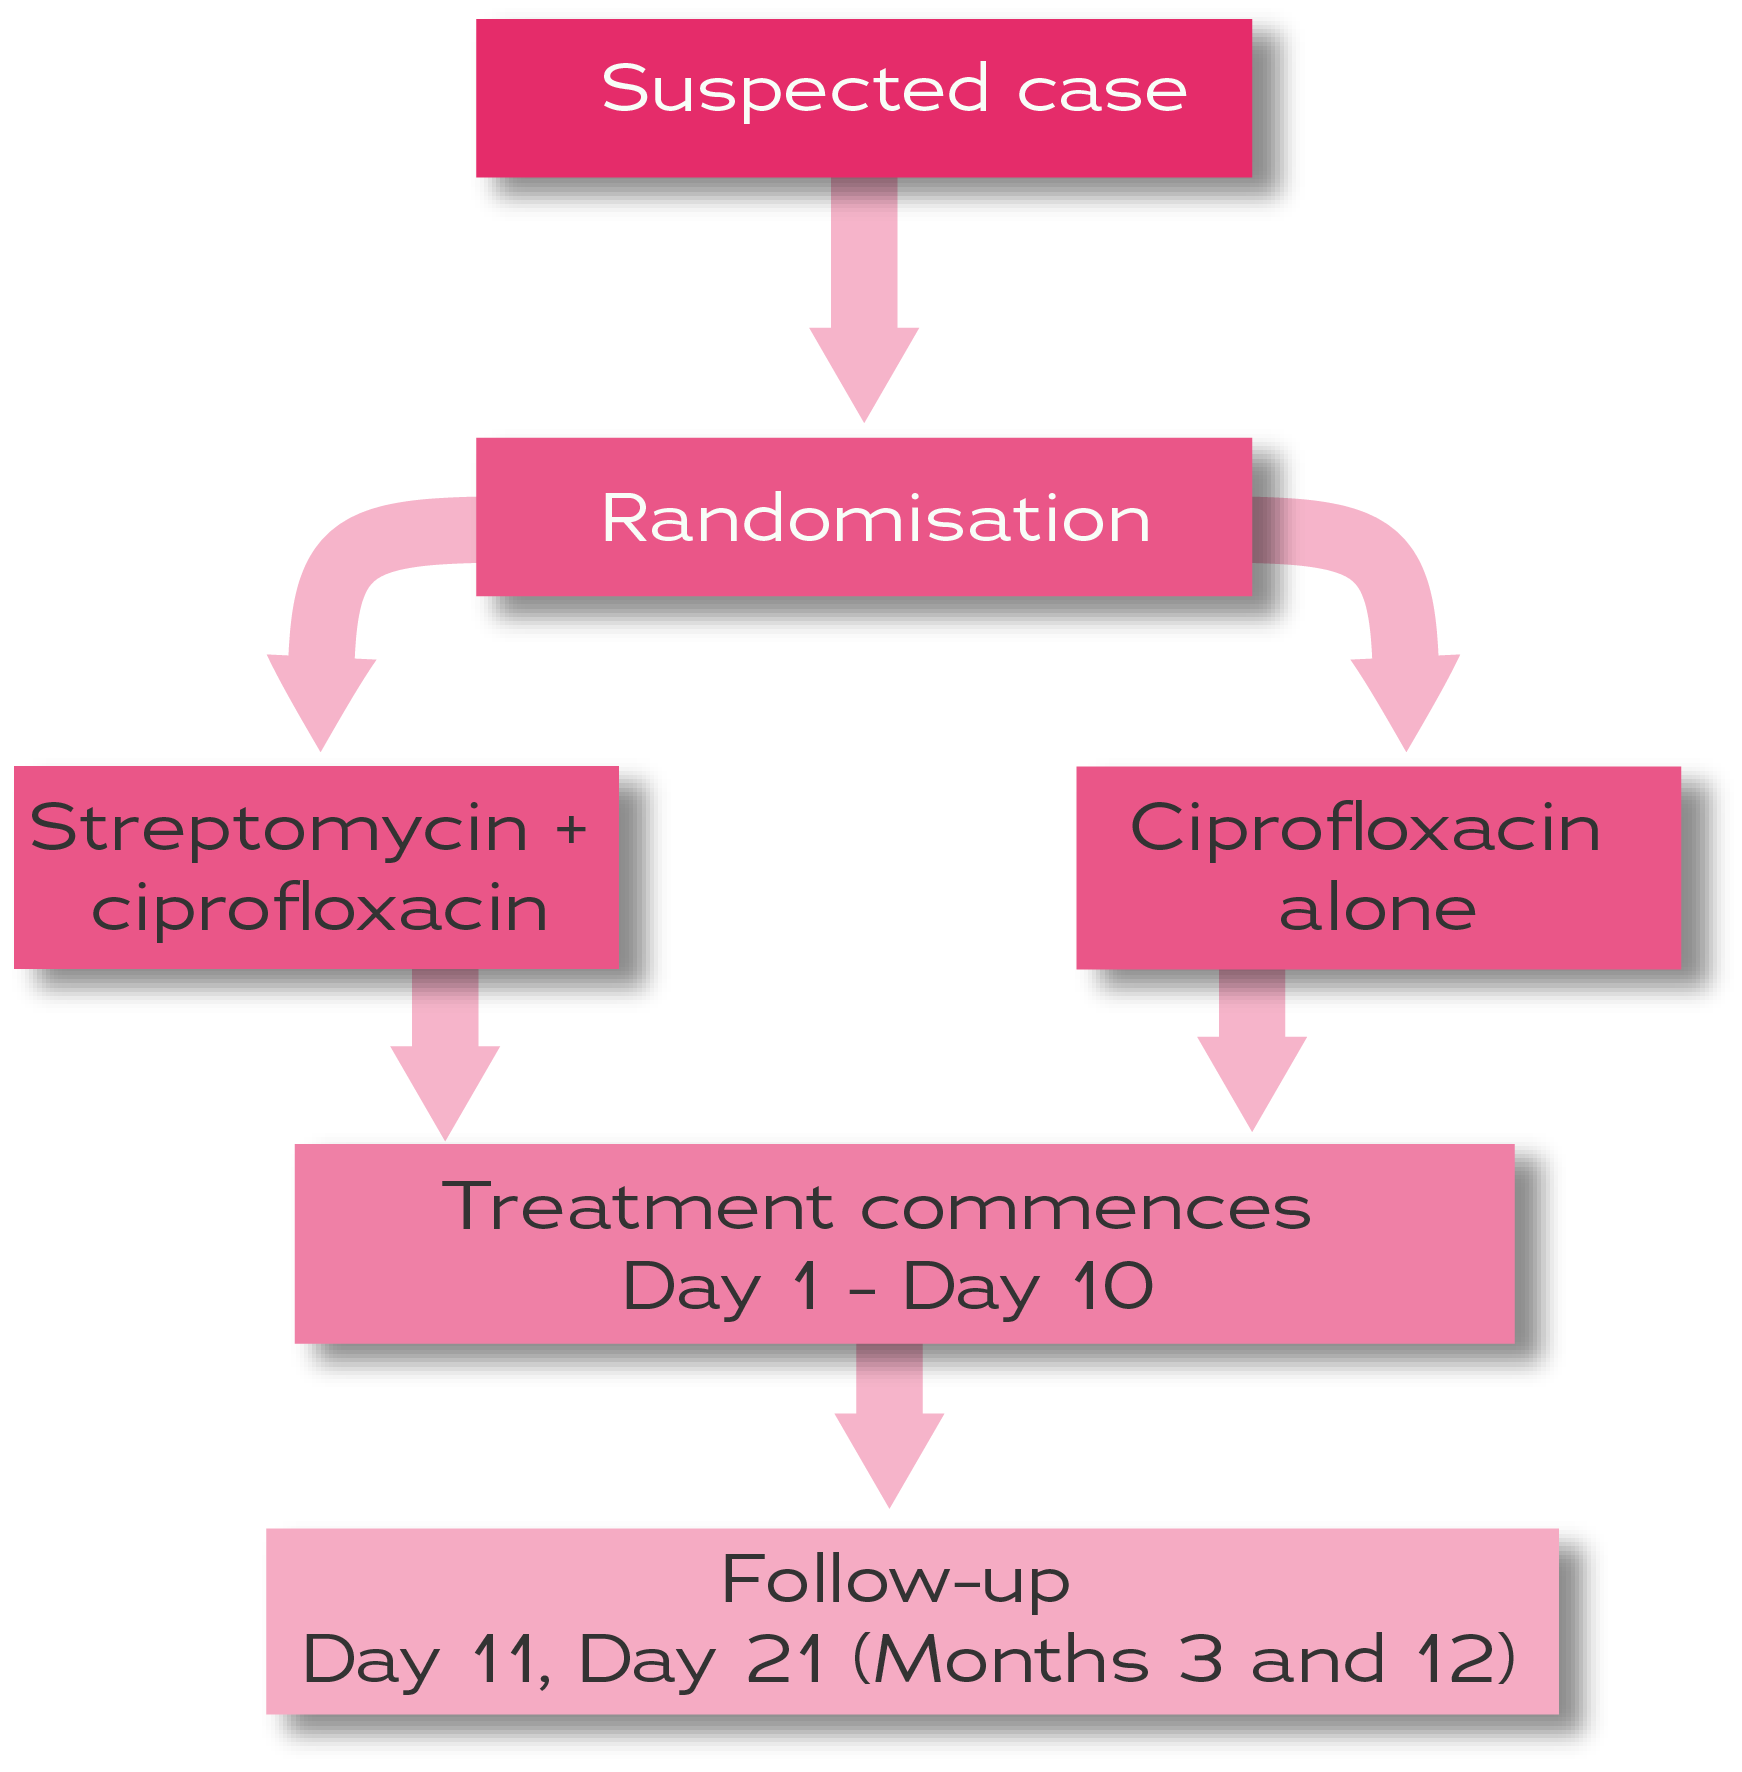 Once a suspected case of plague has been identified, assessed for eligibility and included in the trial, they will be randomised to one of two possible treatments: streptomycin + ciprofloxacin OR ciprofloxacin alone. Treatment in both arms will last for 10 consecutive days. Included patients will then be followed up on days 11 and 21. For those who receive a positive result for plague at day 21, they will attend another follow-up visit at month 3 and for those still testing positive for plague at month 3, they will attend a final visit at month 12.